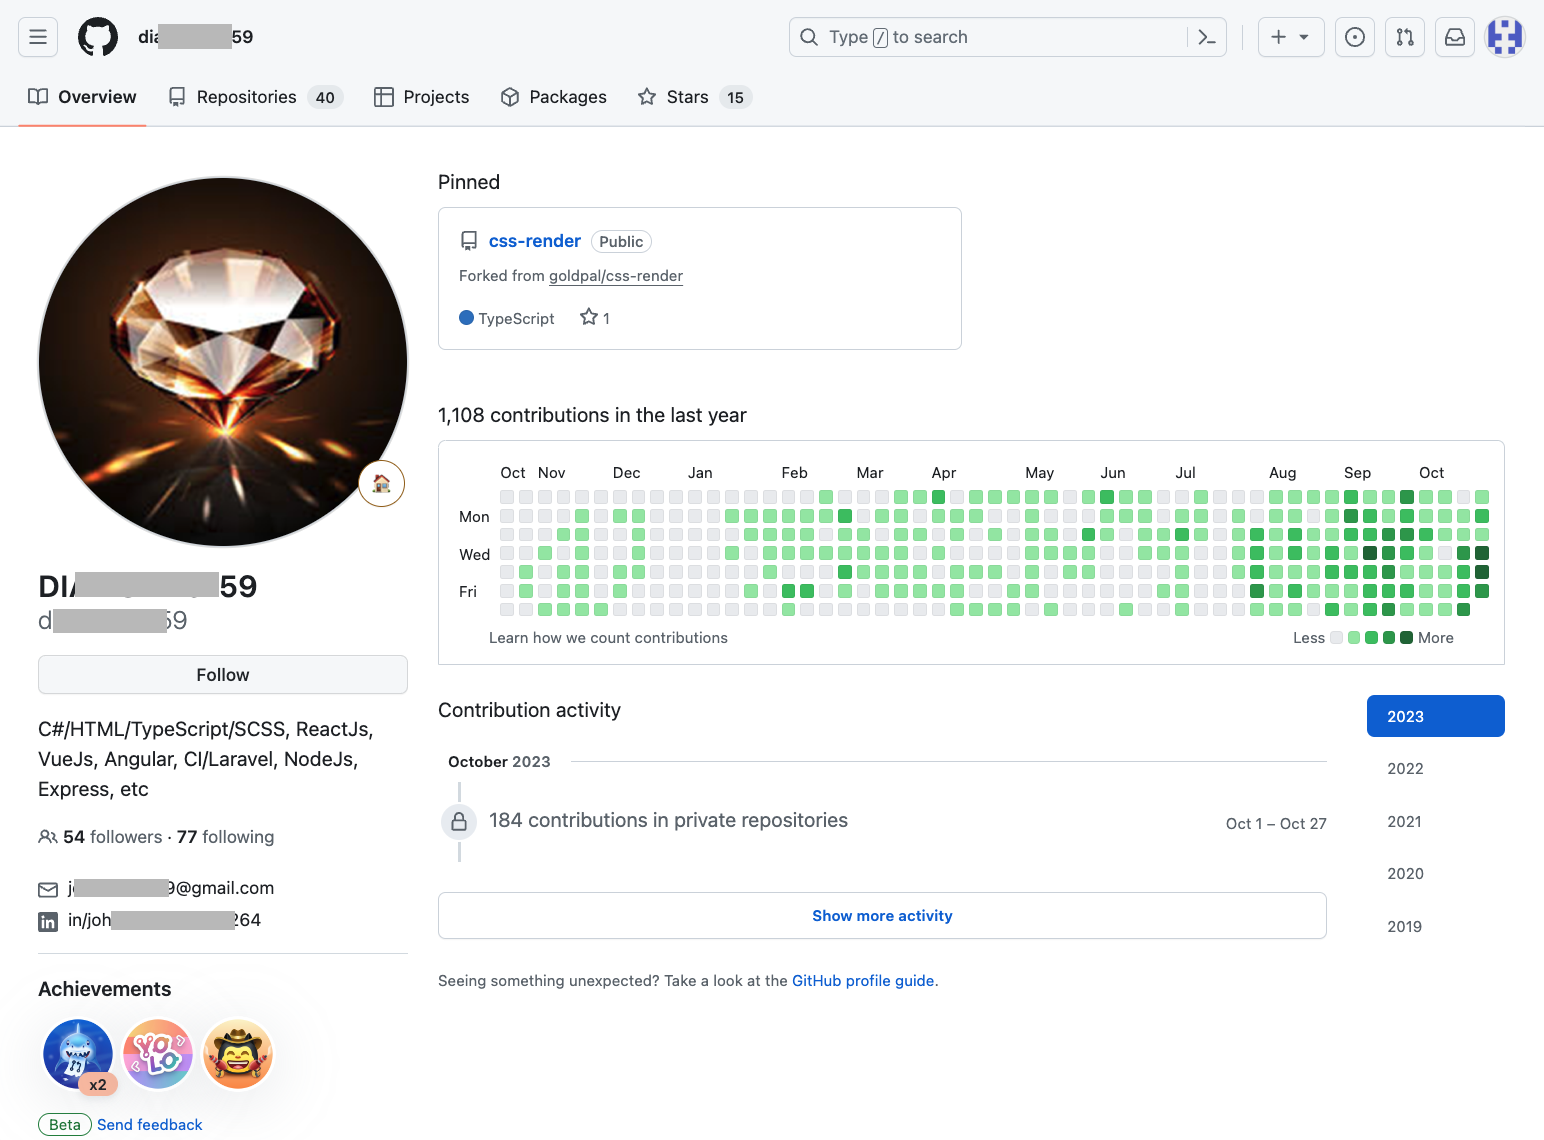 Image 10 is a screenshot of the GitHub repo maintained by one of the job seekers. They have 1,108 contributions total. Their profile picture is a generic jewel. Some personal info is redacted. 